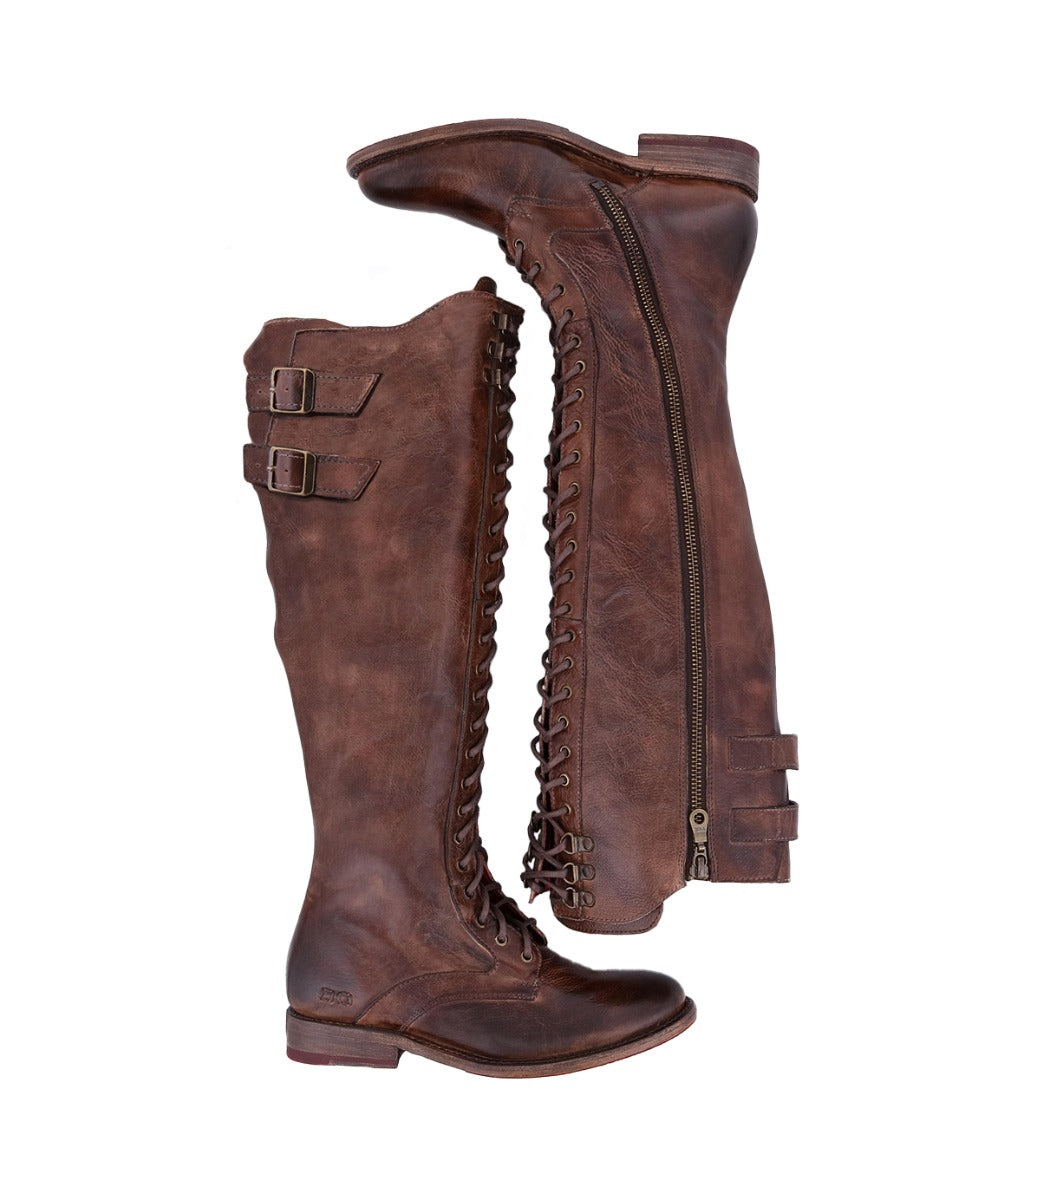 A pair of Della brown boots from Bed Stu with buckles and zippers.